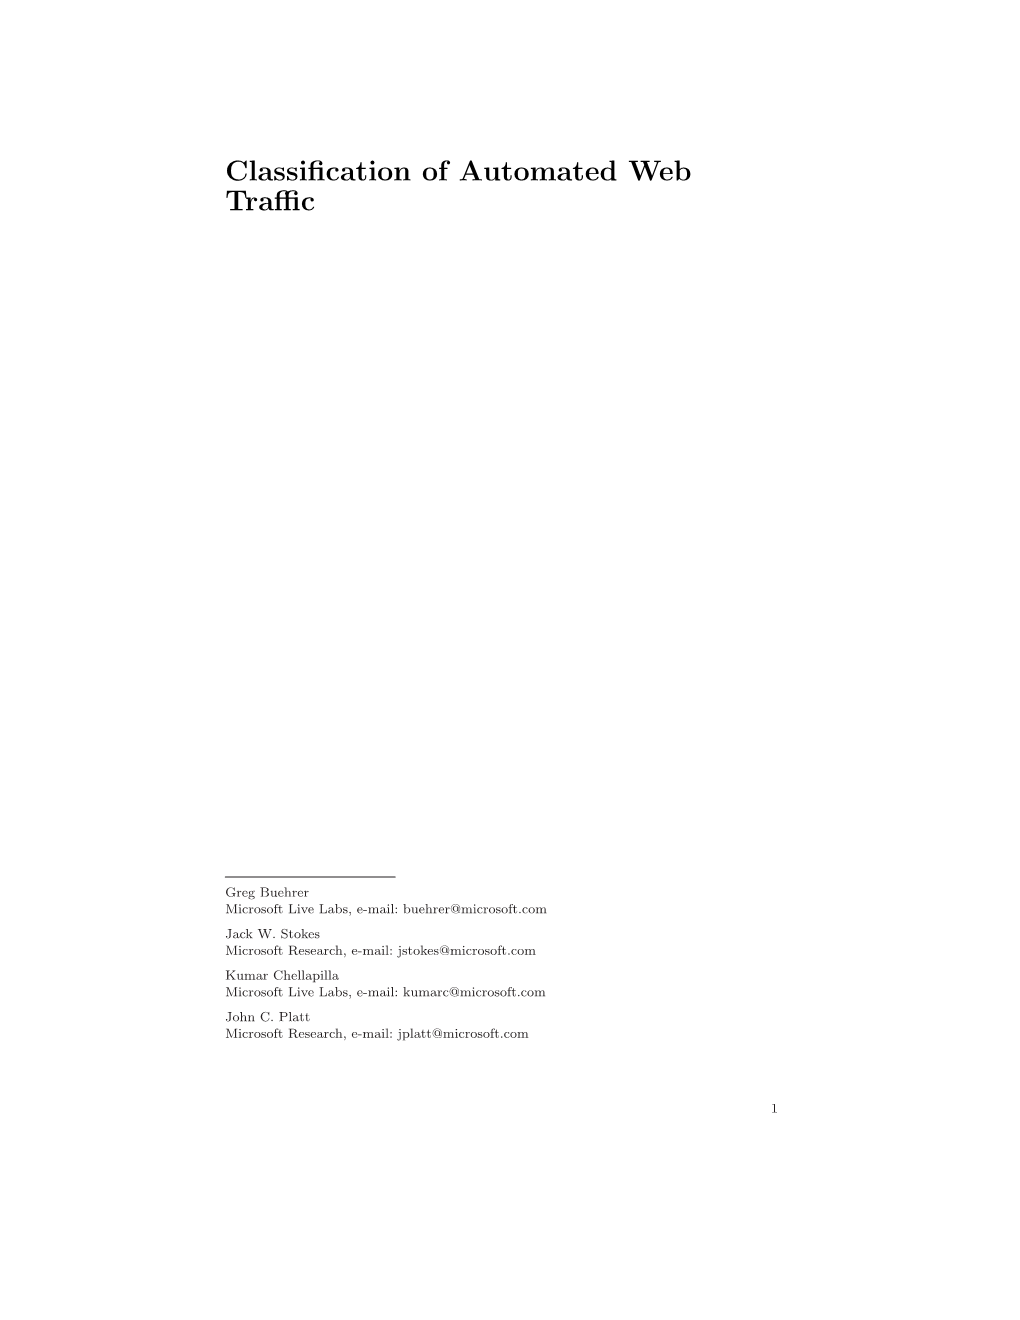 Classification of Automated Web Traffic